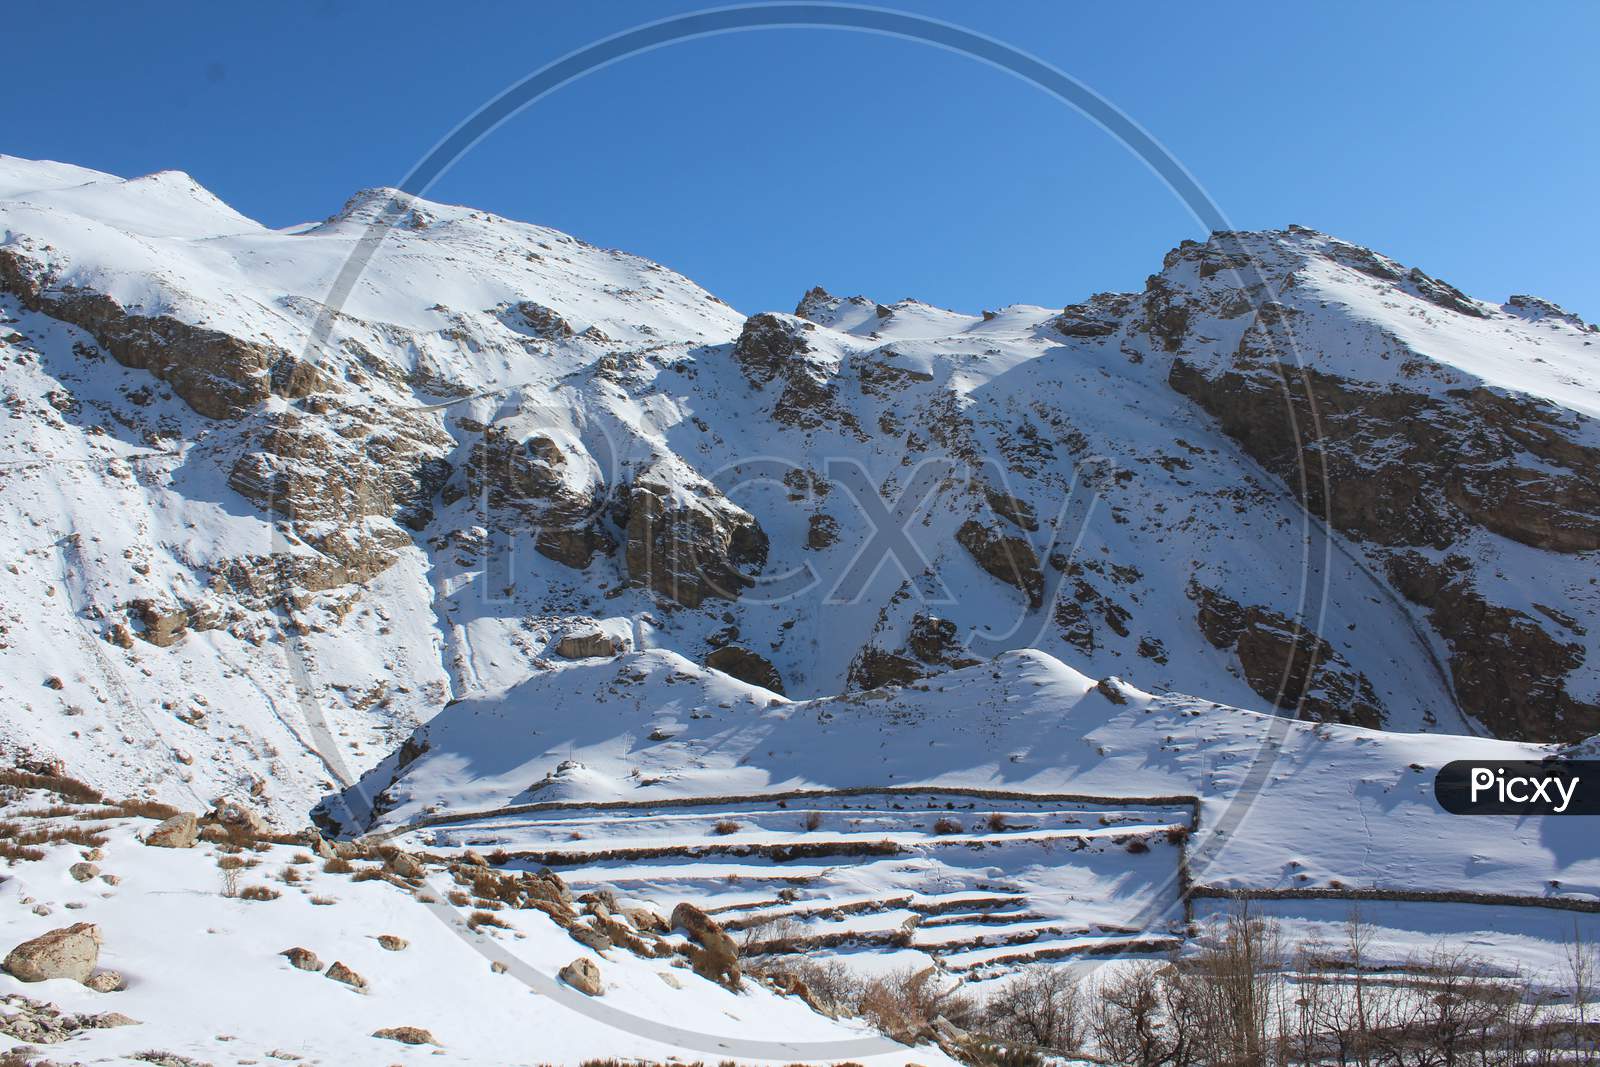 Spiti In Northern Part Of India Beautiful And Known For Its High Mountain Village And Monastery